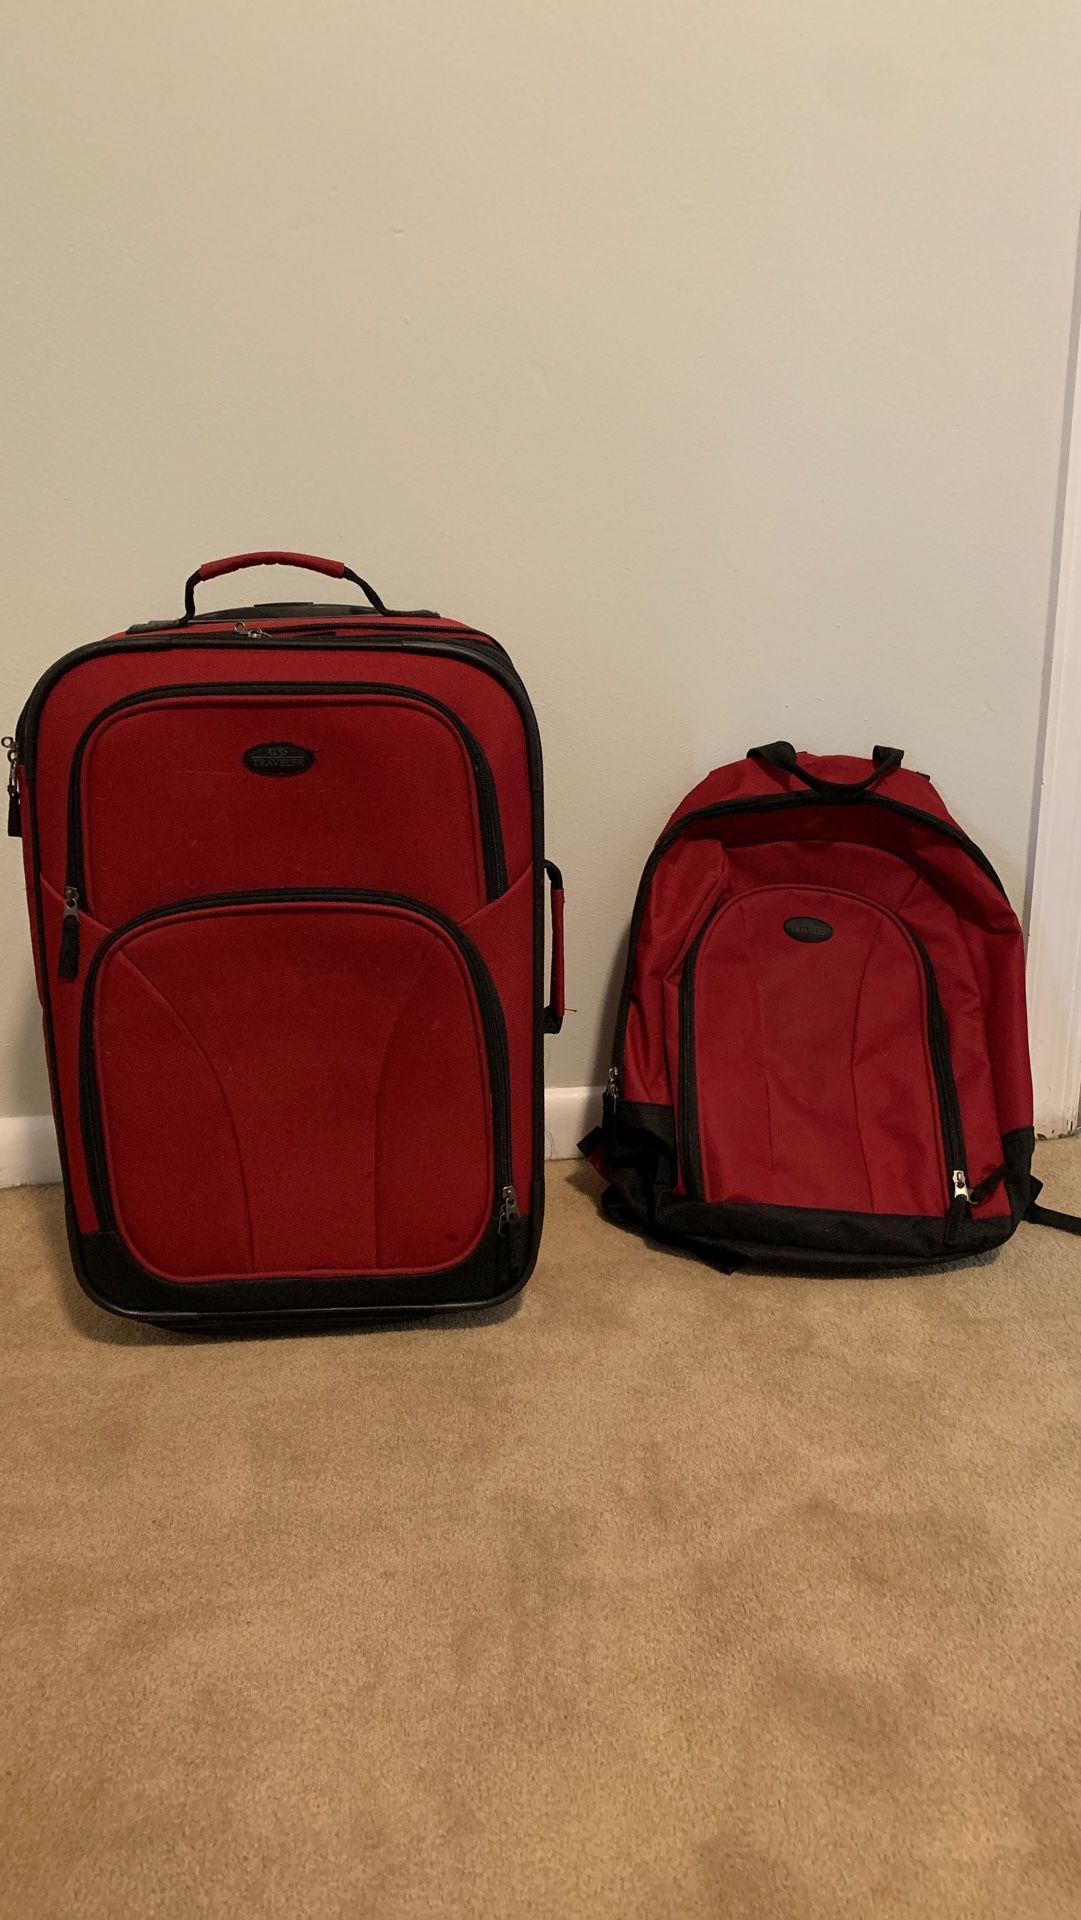 US traveler carry on roller bag and matching backpack